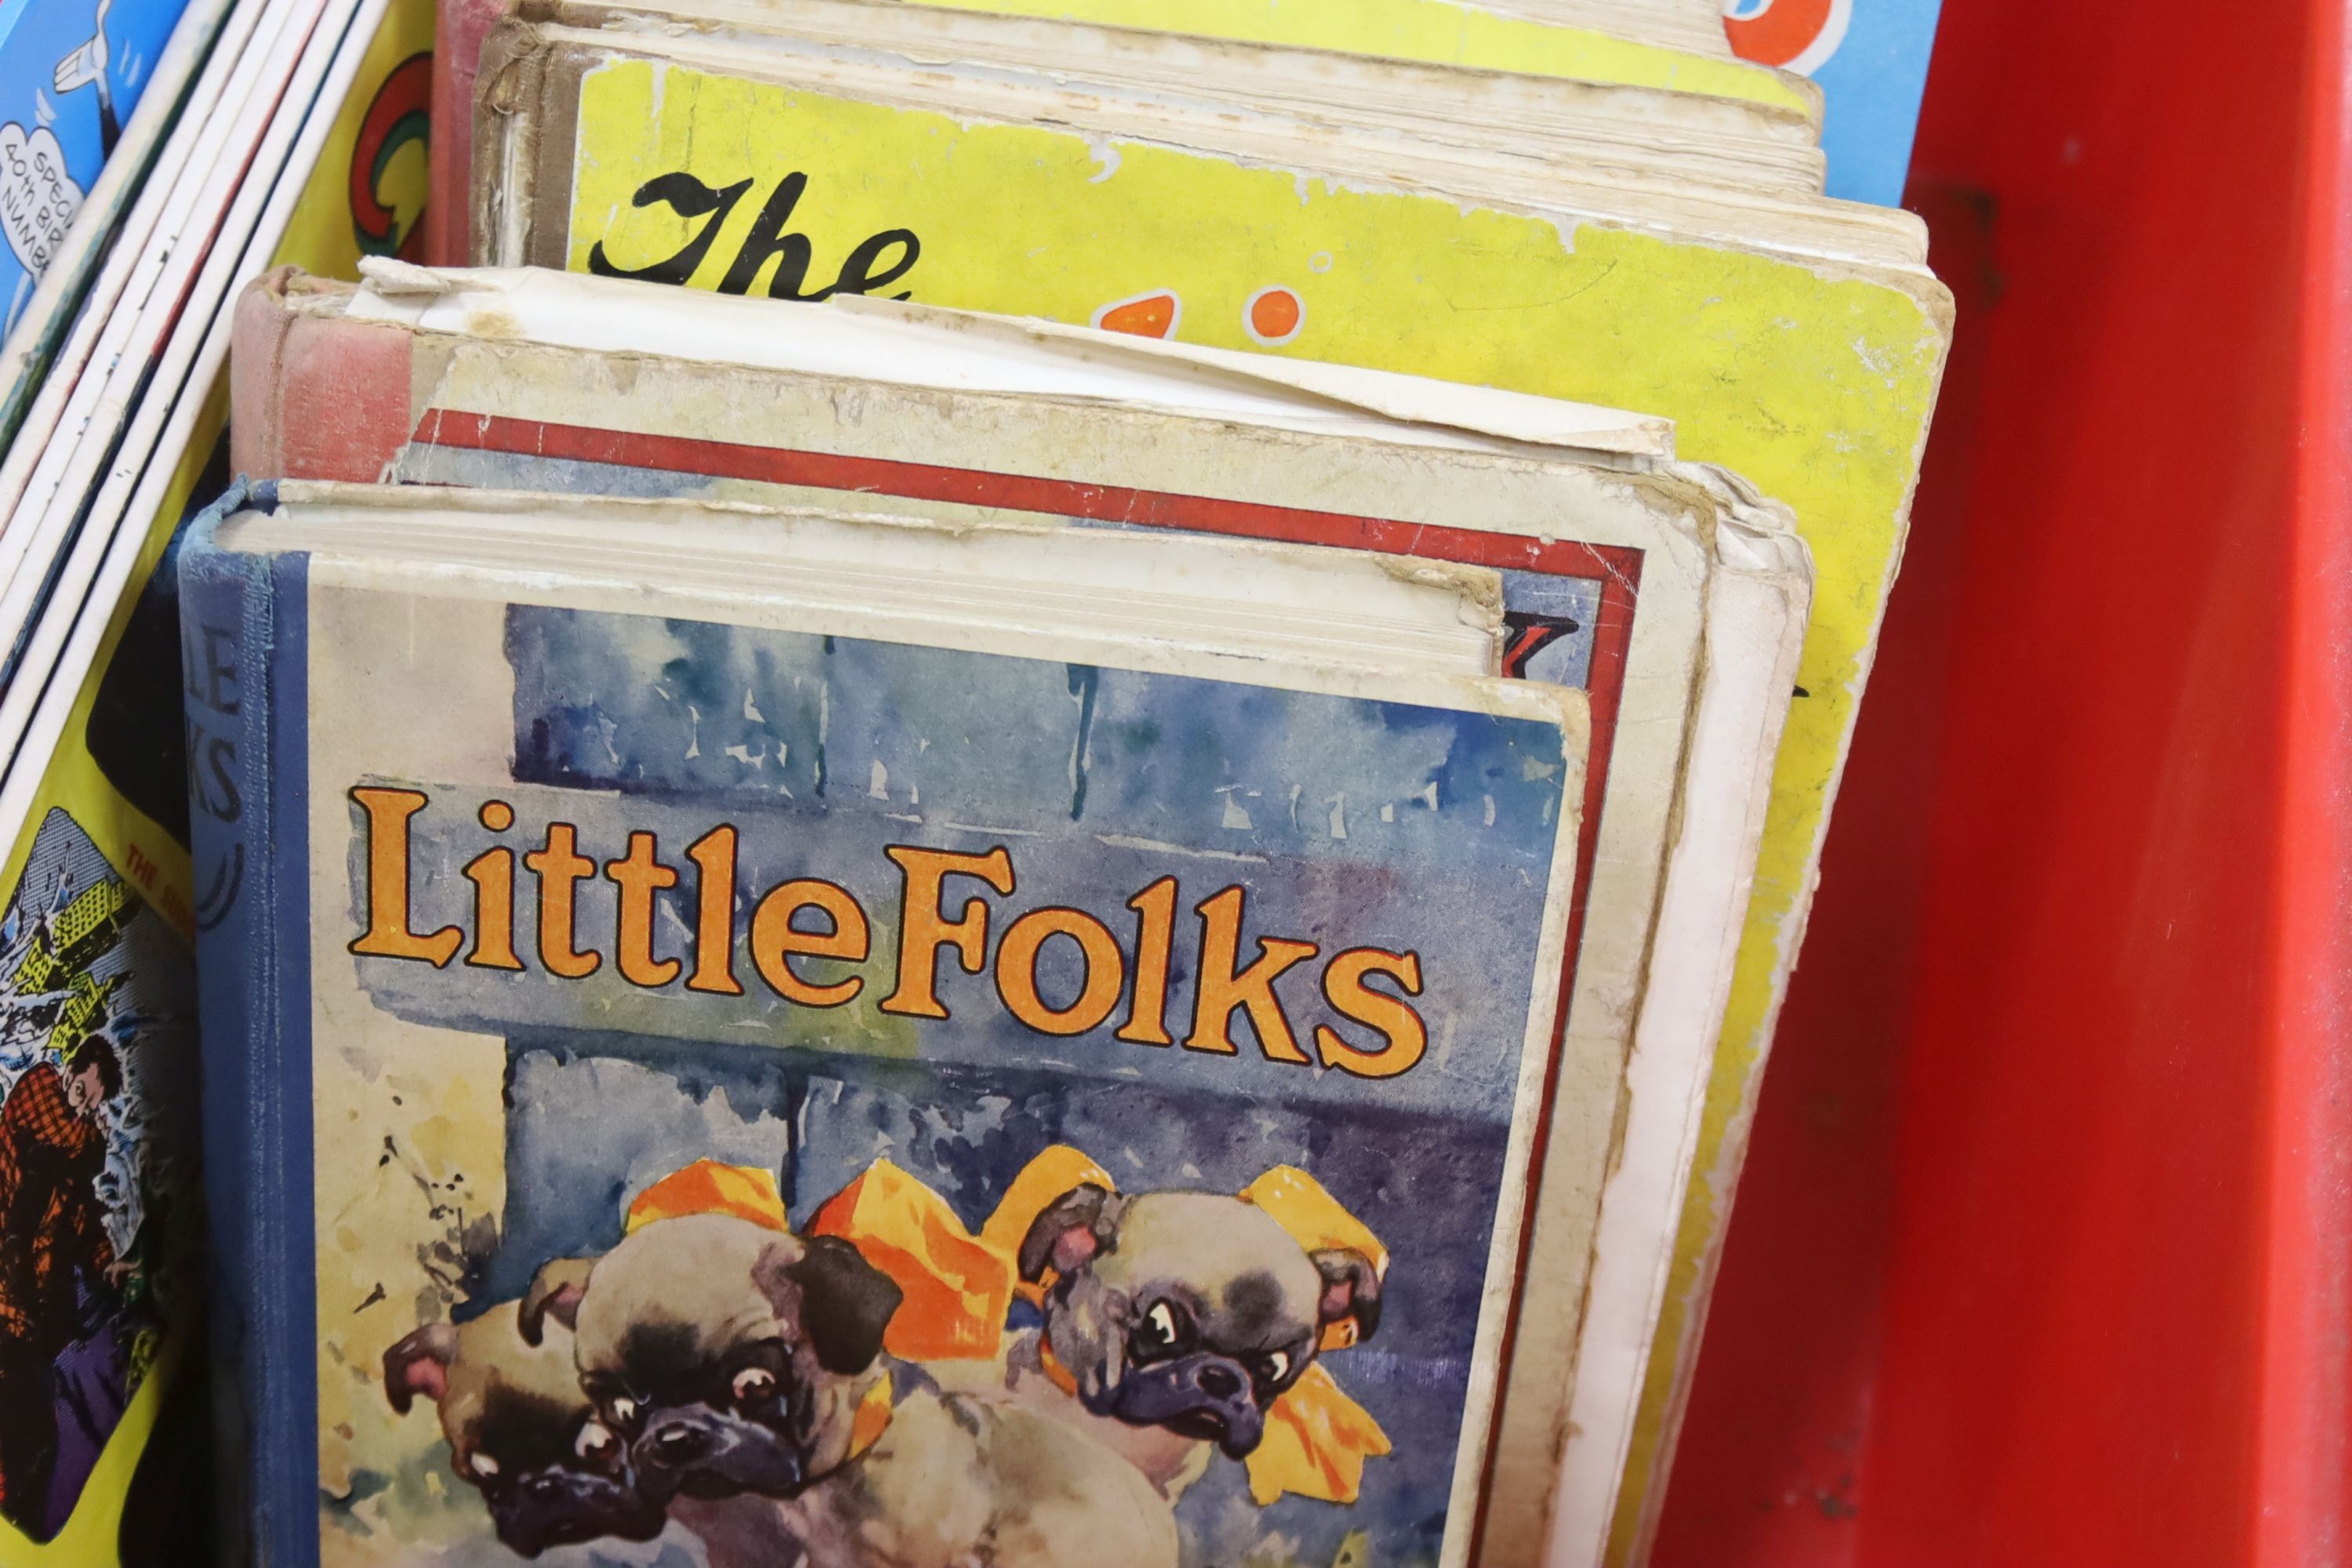 A collection of children's books including the Felix annual, PIp and squeak annual 1929 and 1923, Wilfrid‘s annual 1930 and 1933, Down at the Farm with Enid Blyton, Sunny Stories annual, the lovesome book for little folk